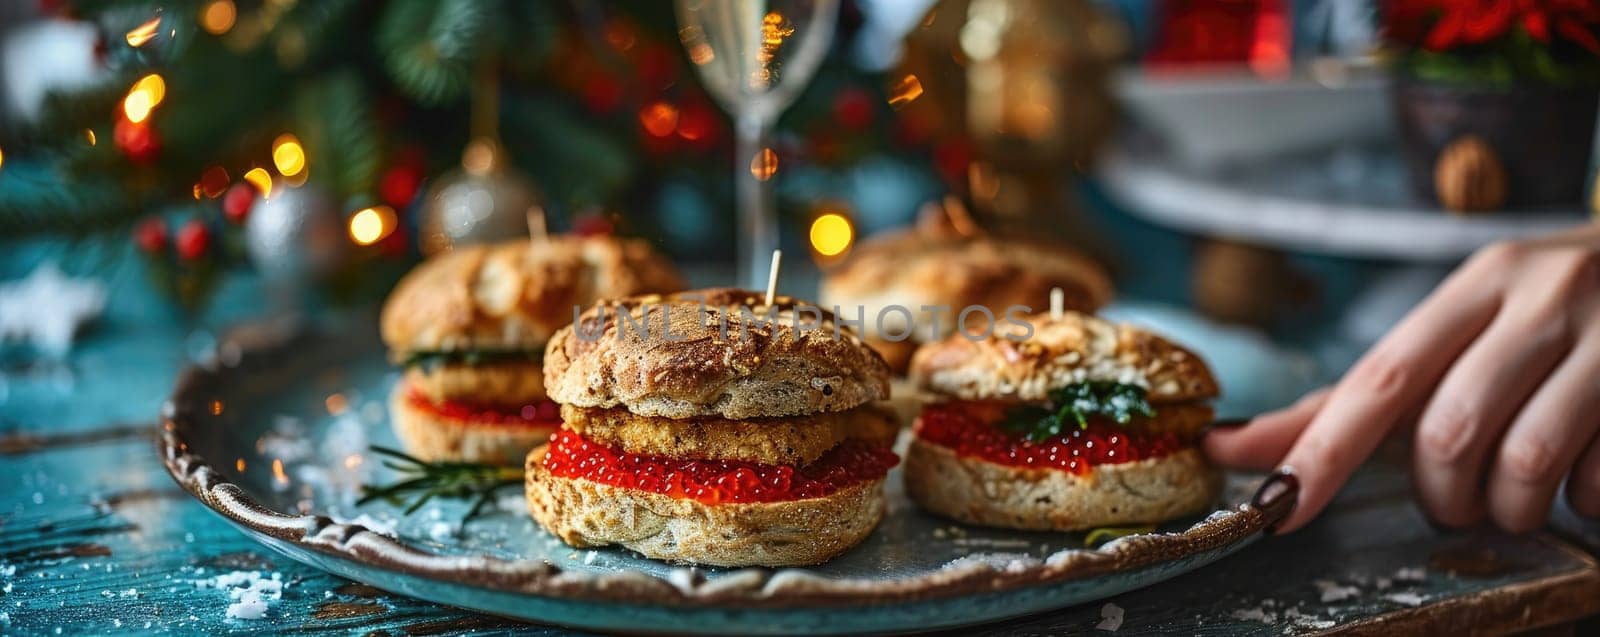 Festive burgers with red caviar by Yurich32